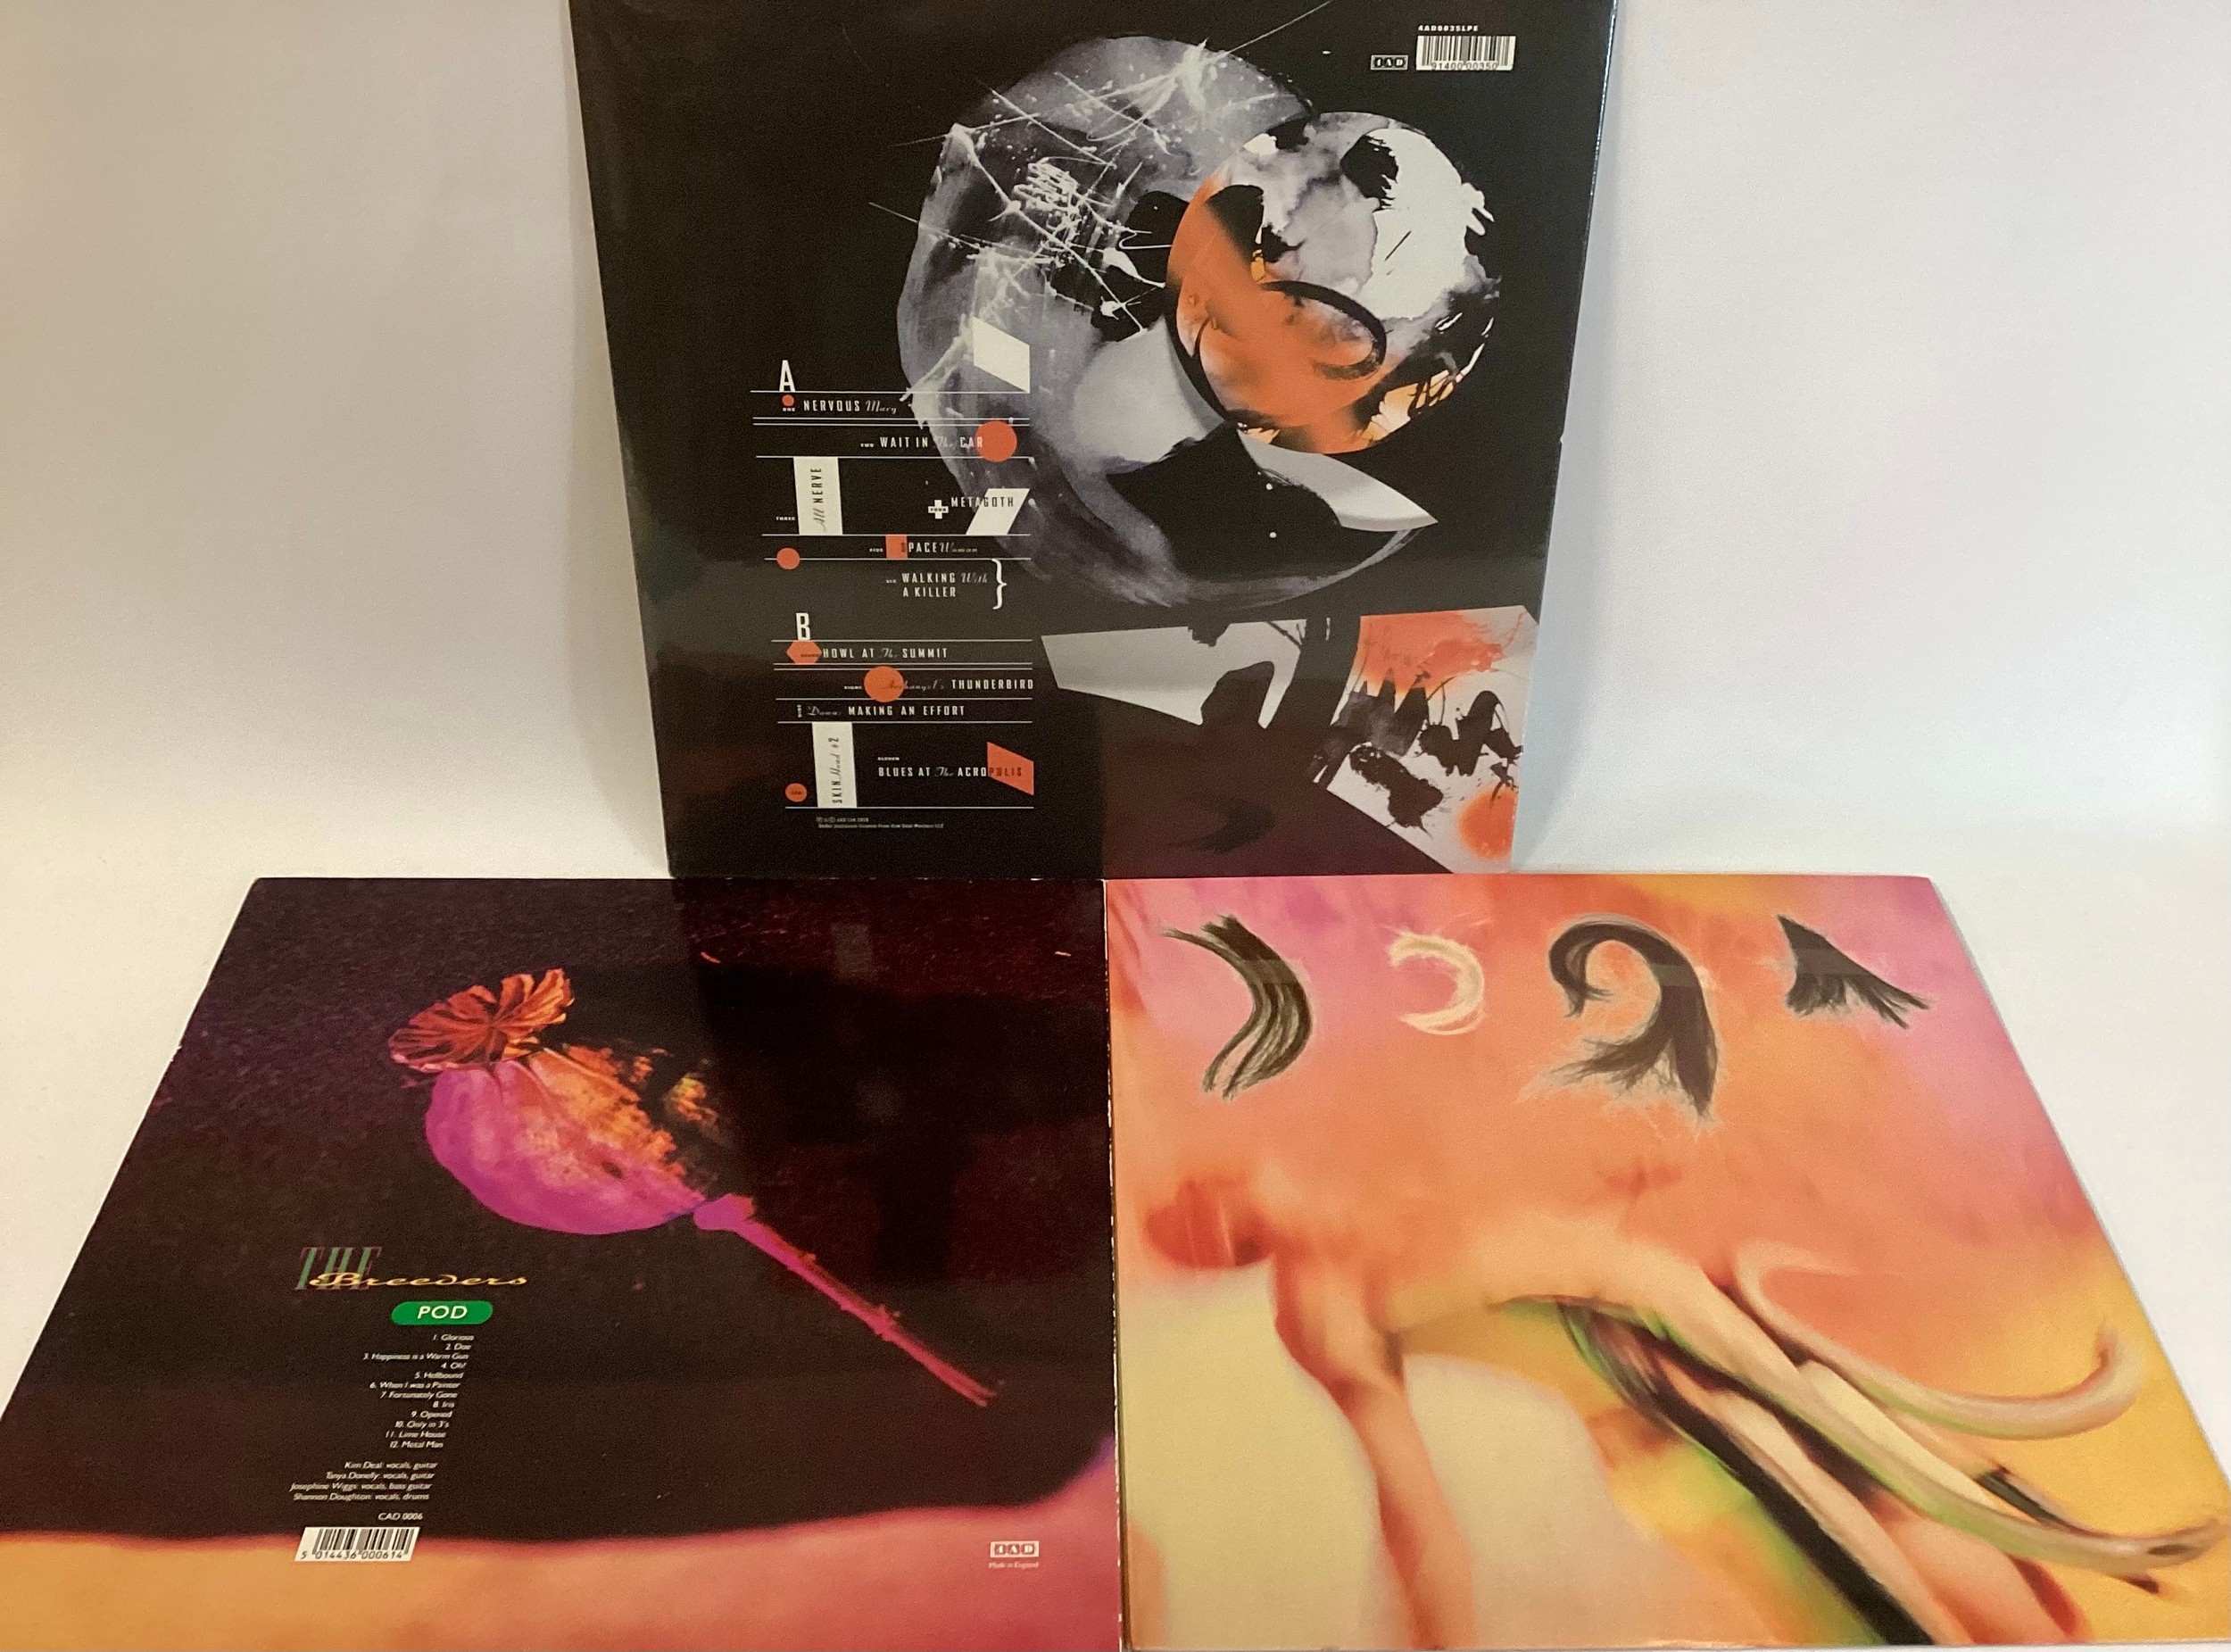 THE BREEDERS VINYL LP RECORDS X 2. First we have a brand new copy of ‘All Nerve’ found here - Bild 2 aus 2